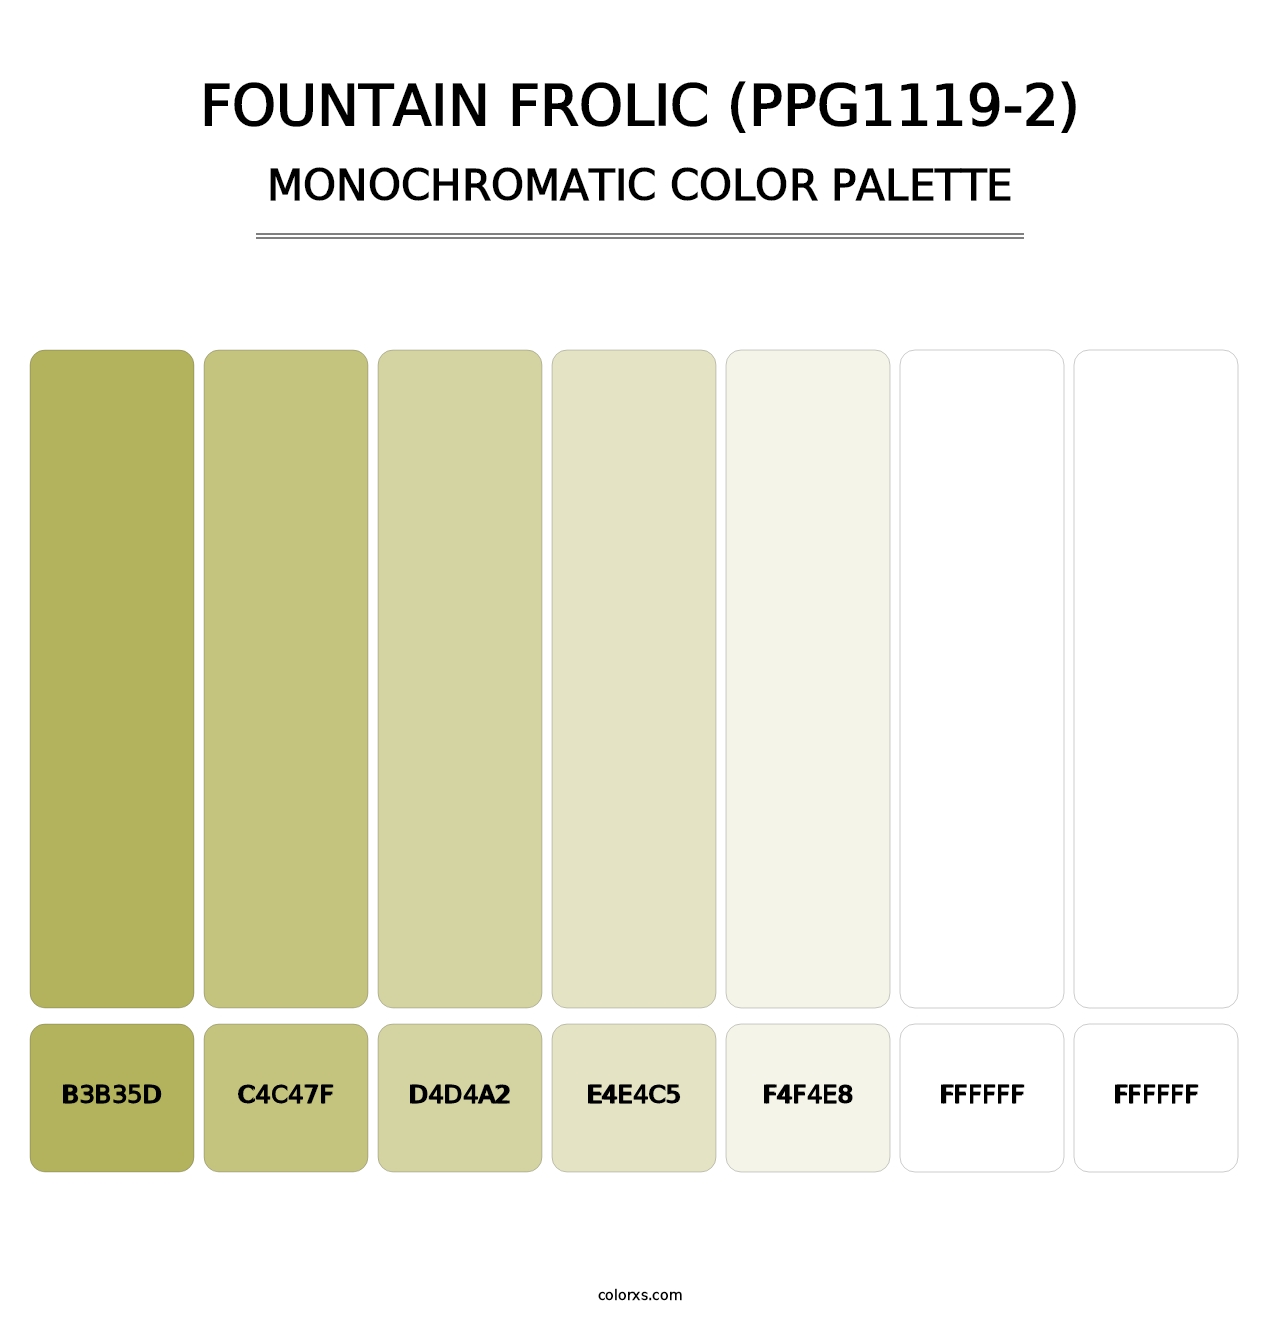 Fountain Frolic (PPG1119-2) - Monochromatic Color Palette